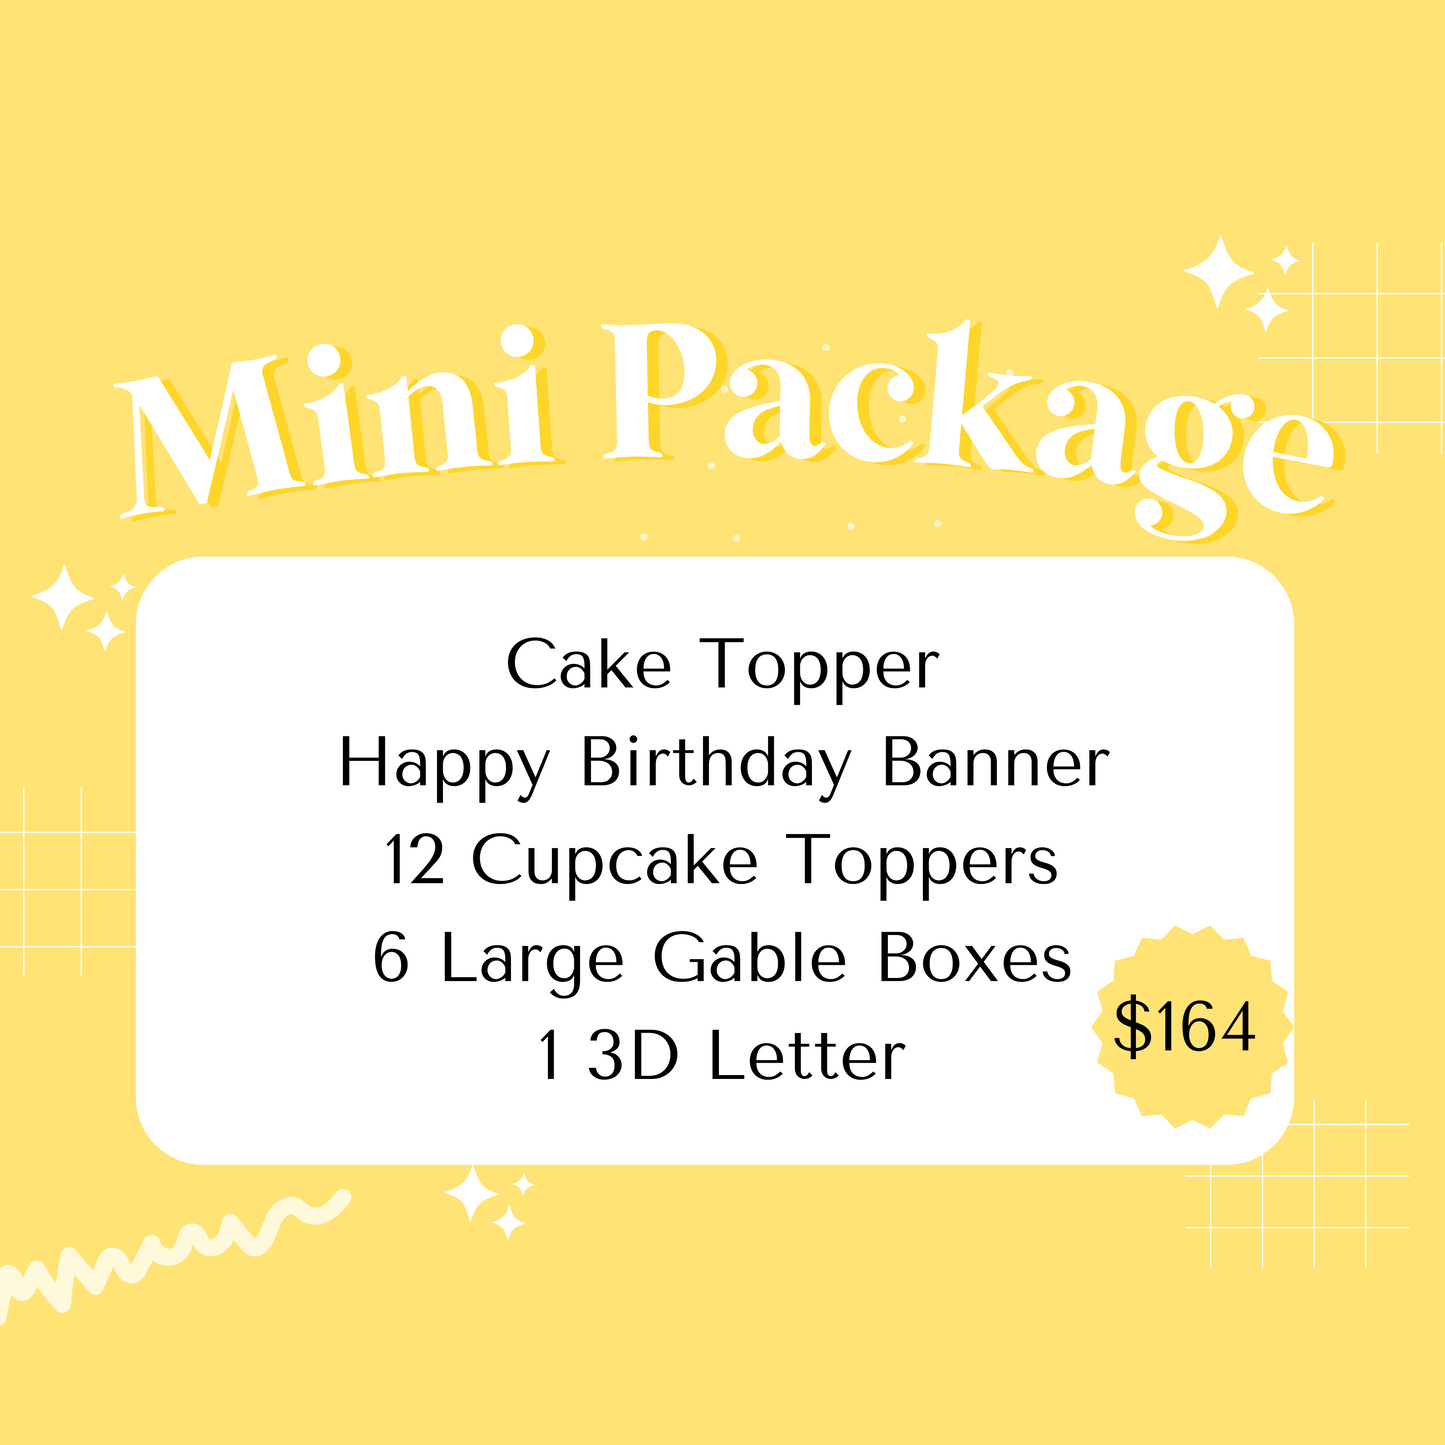 Mini Party Package